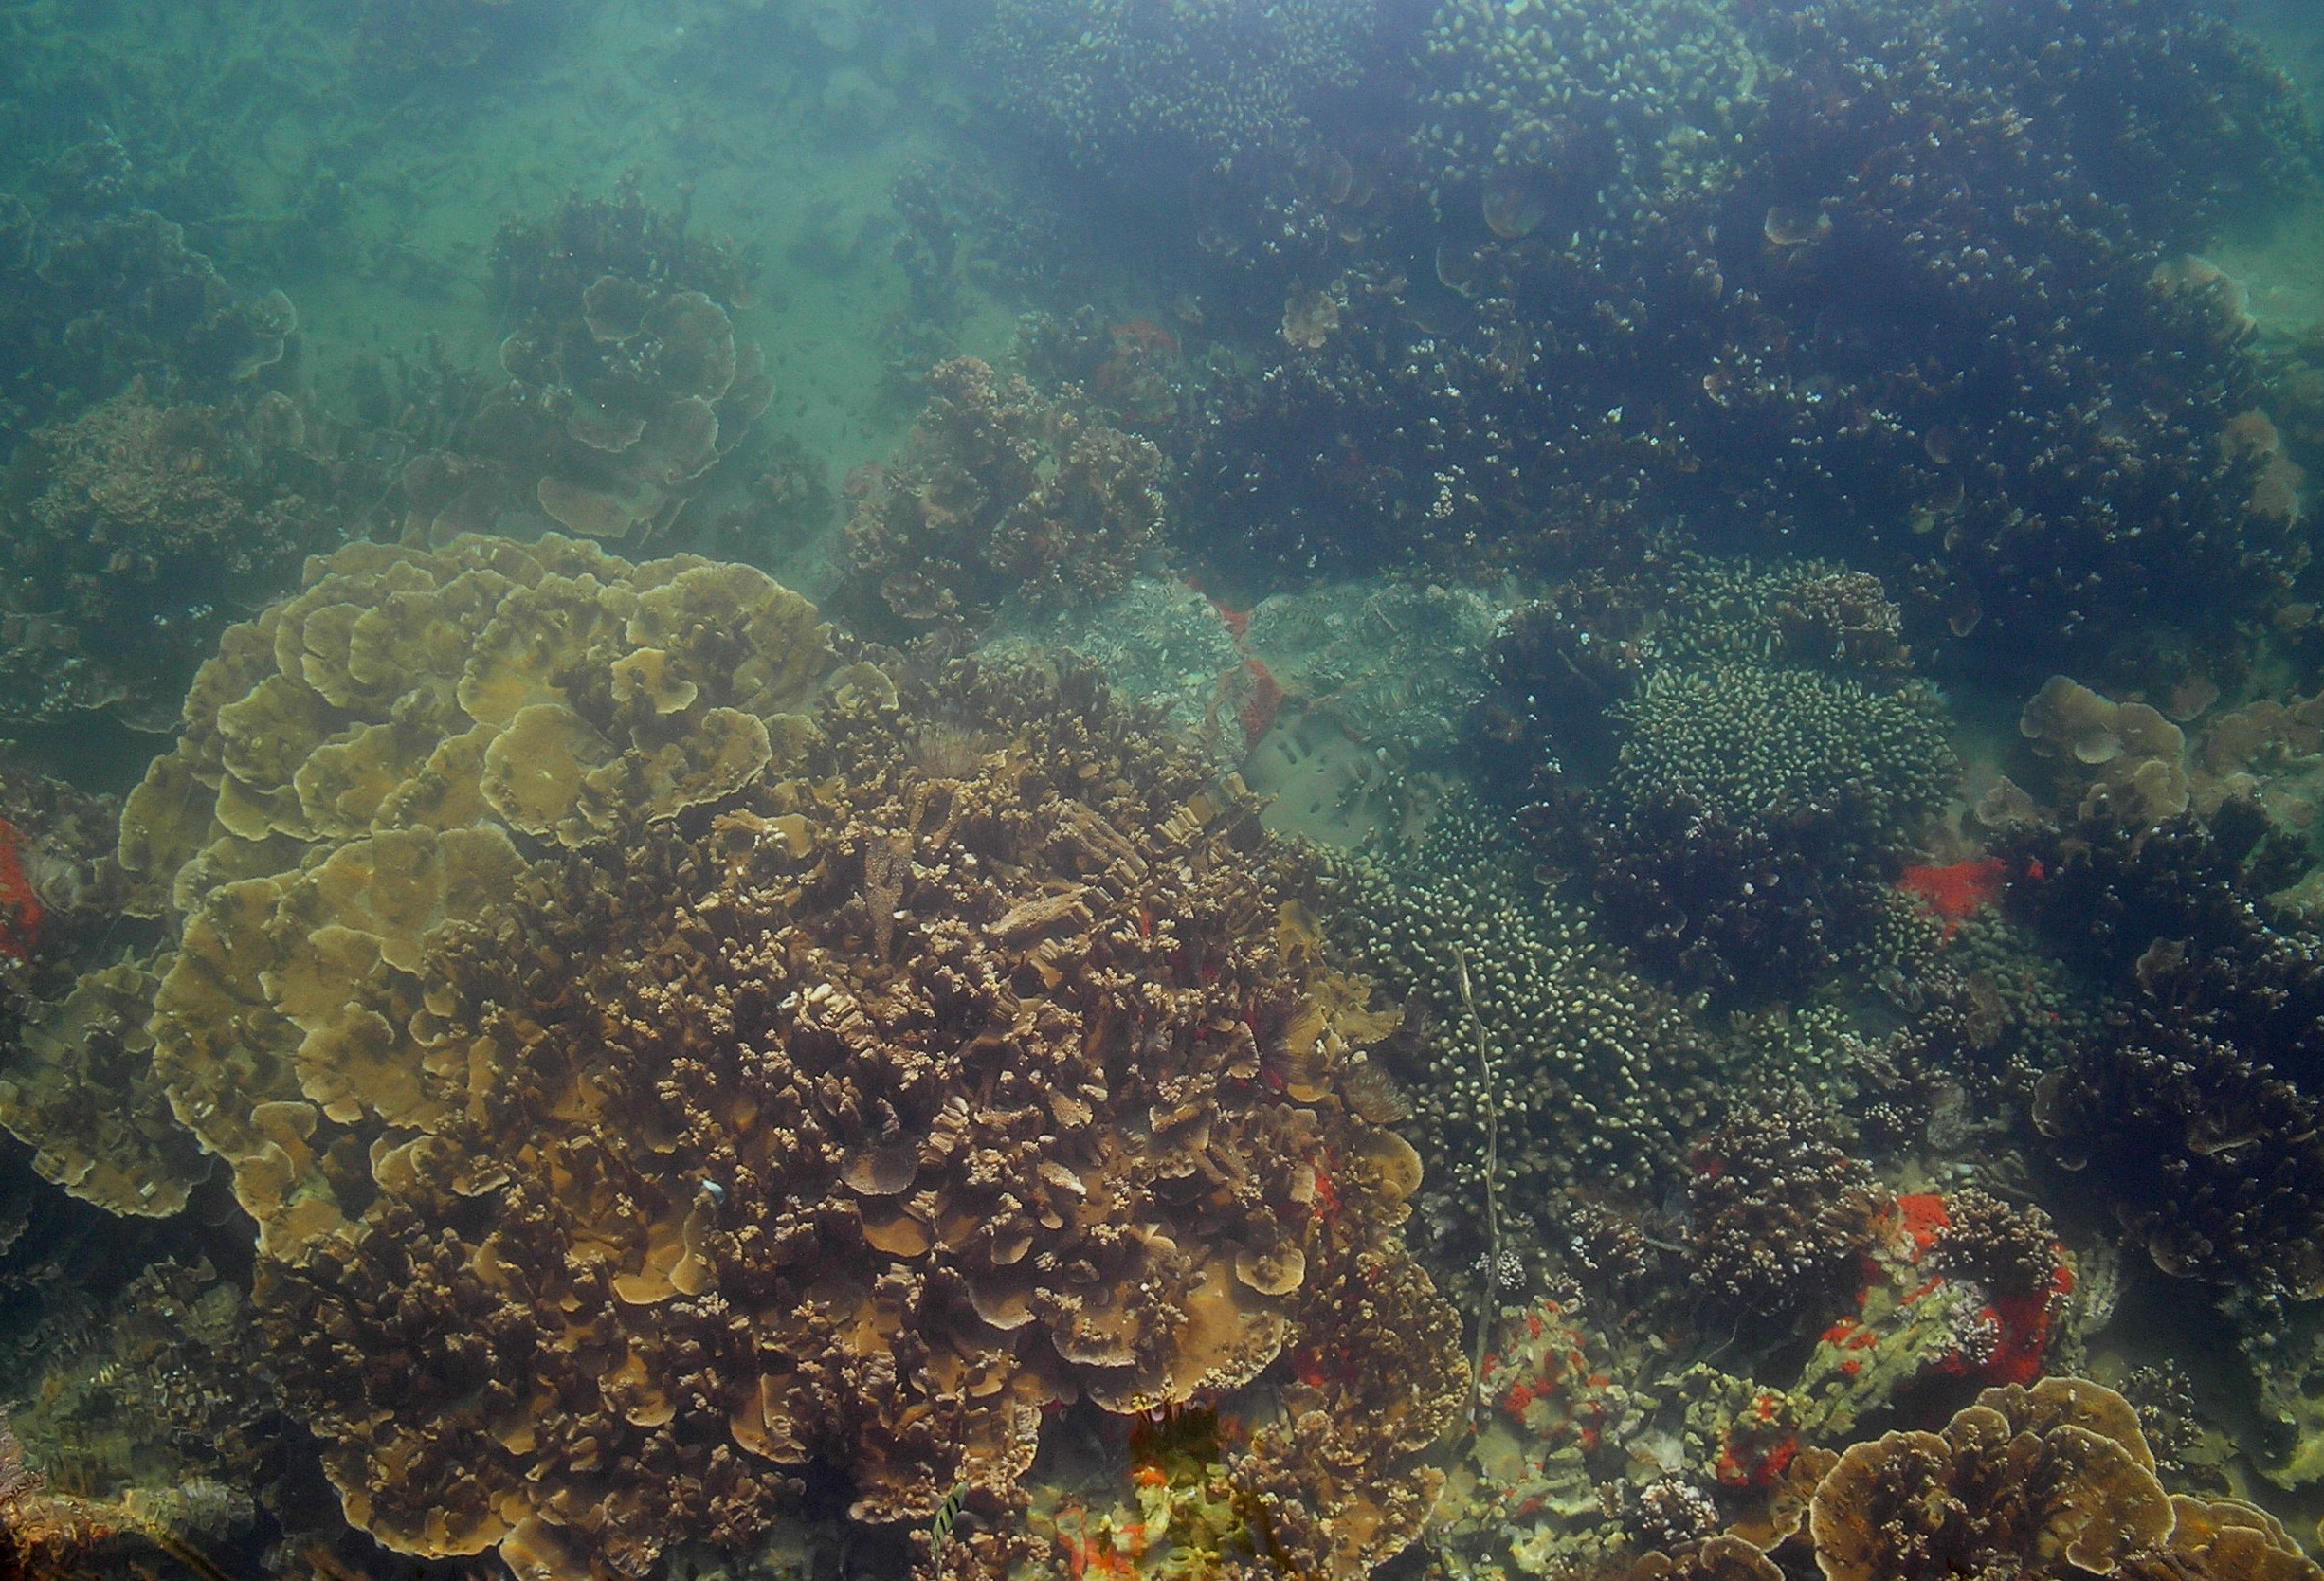 coral by the docks.JPG